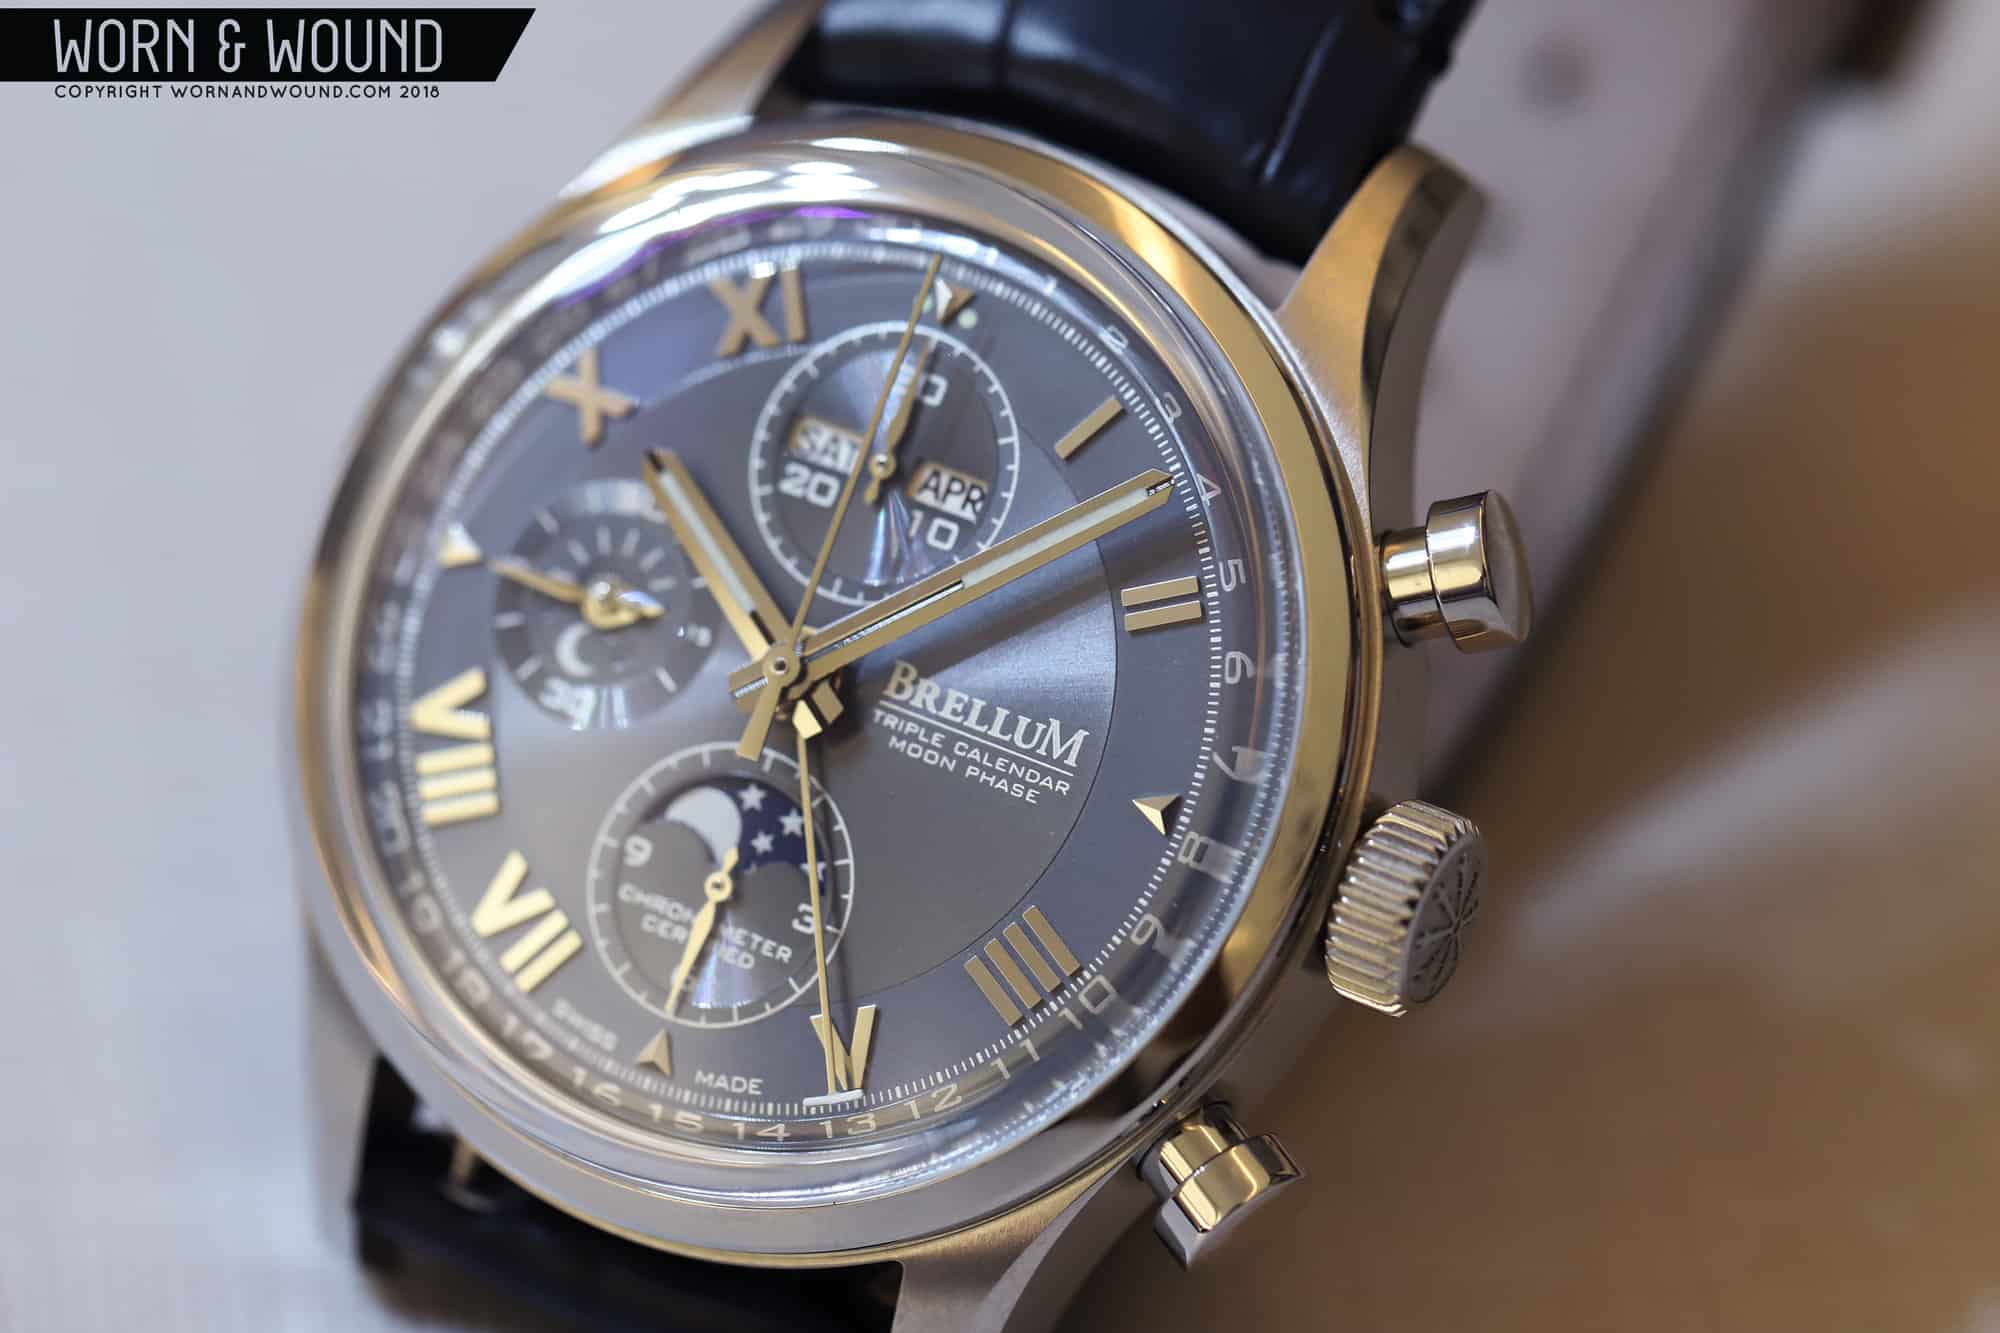 First Look: Brellum Duobox Classic LE.3, a COSC-Certified Chronograph with a Triple Calendar and Moonphase